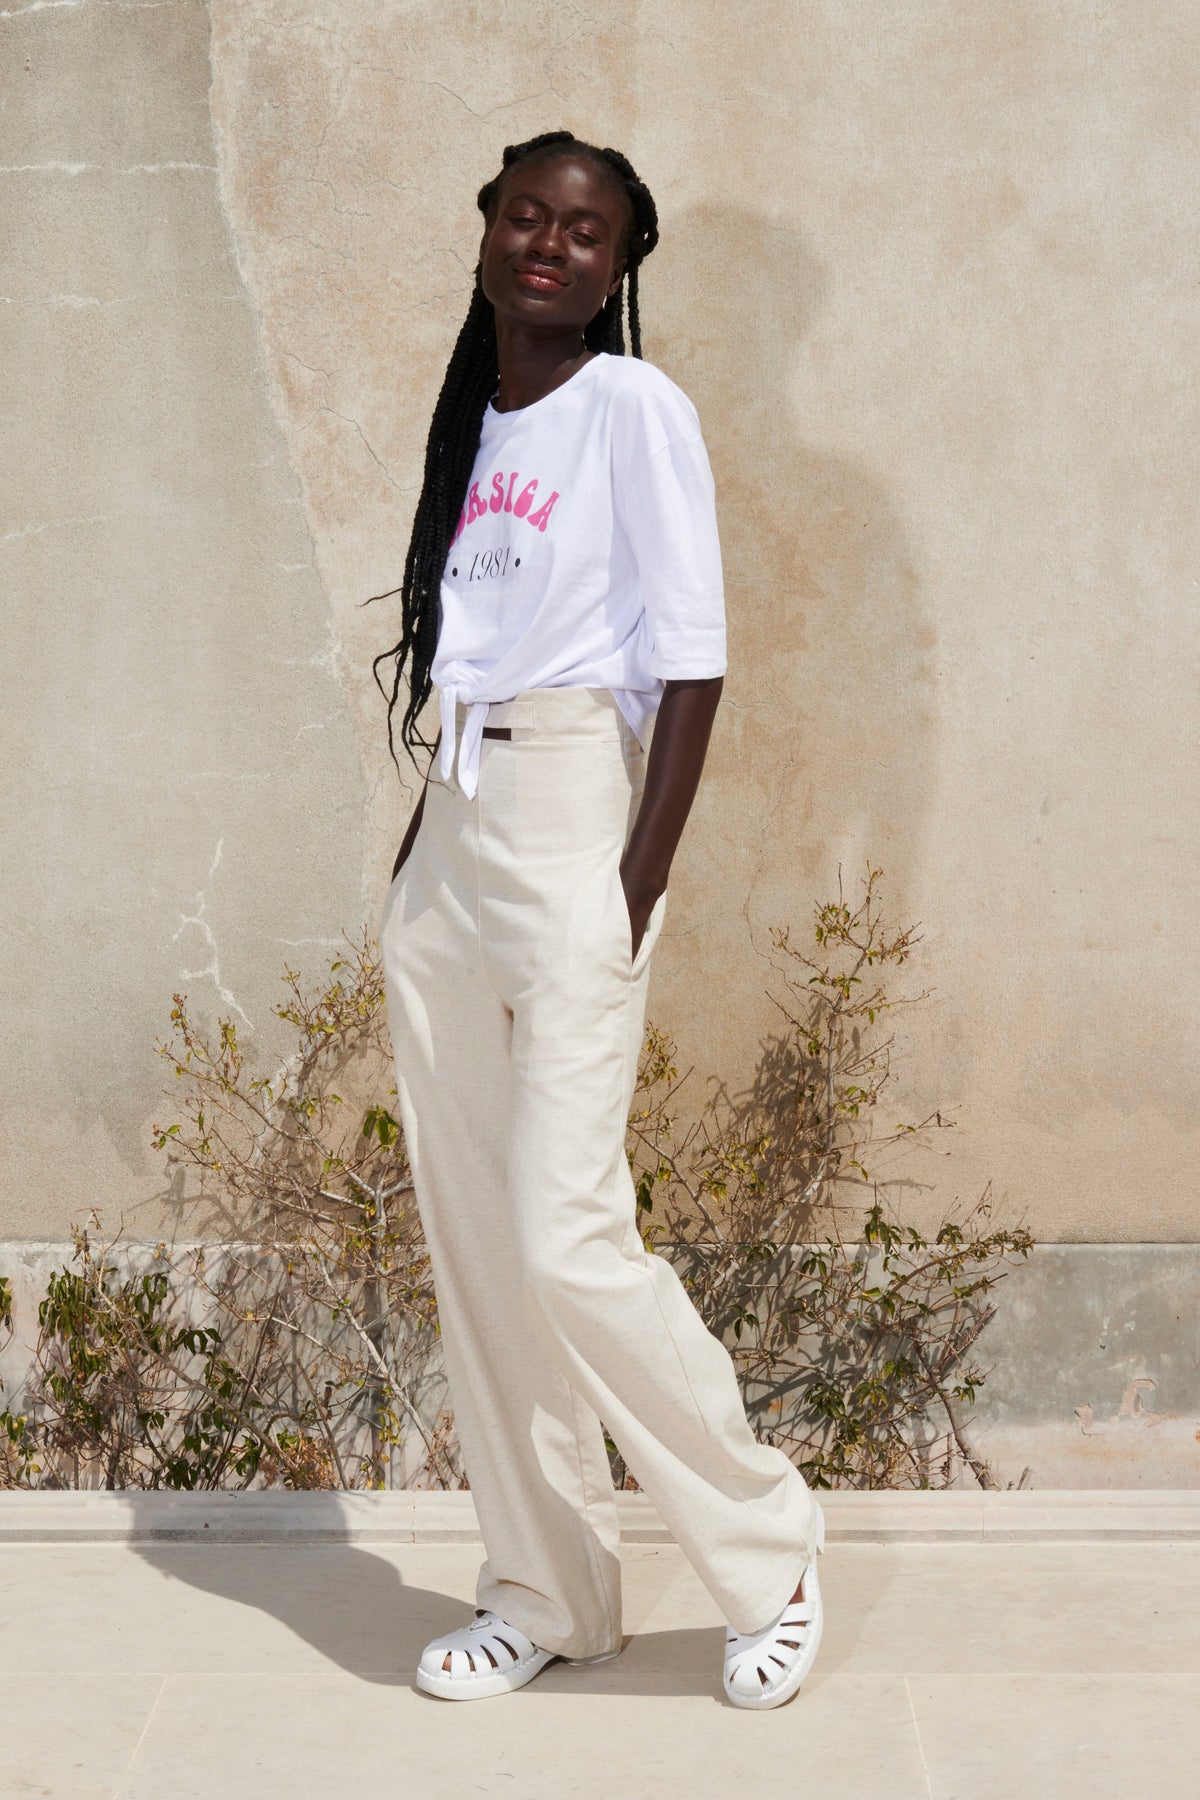 CORSICA - Short-sleeved knotted cropped T-shirt in Cotton white fuchsia pink print T-shirt Fête Impériale